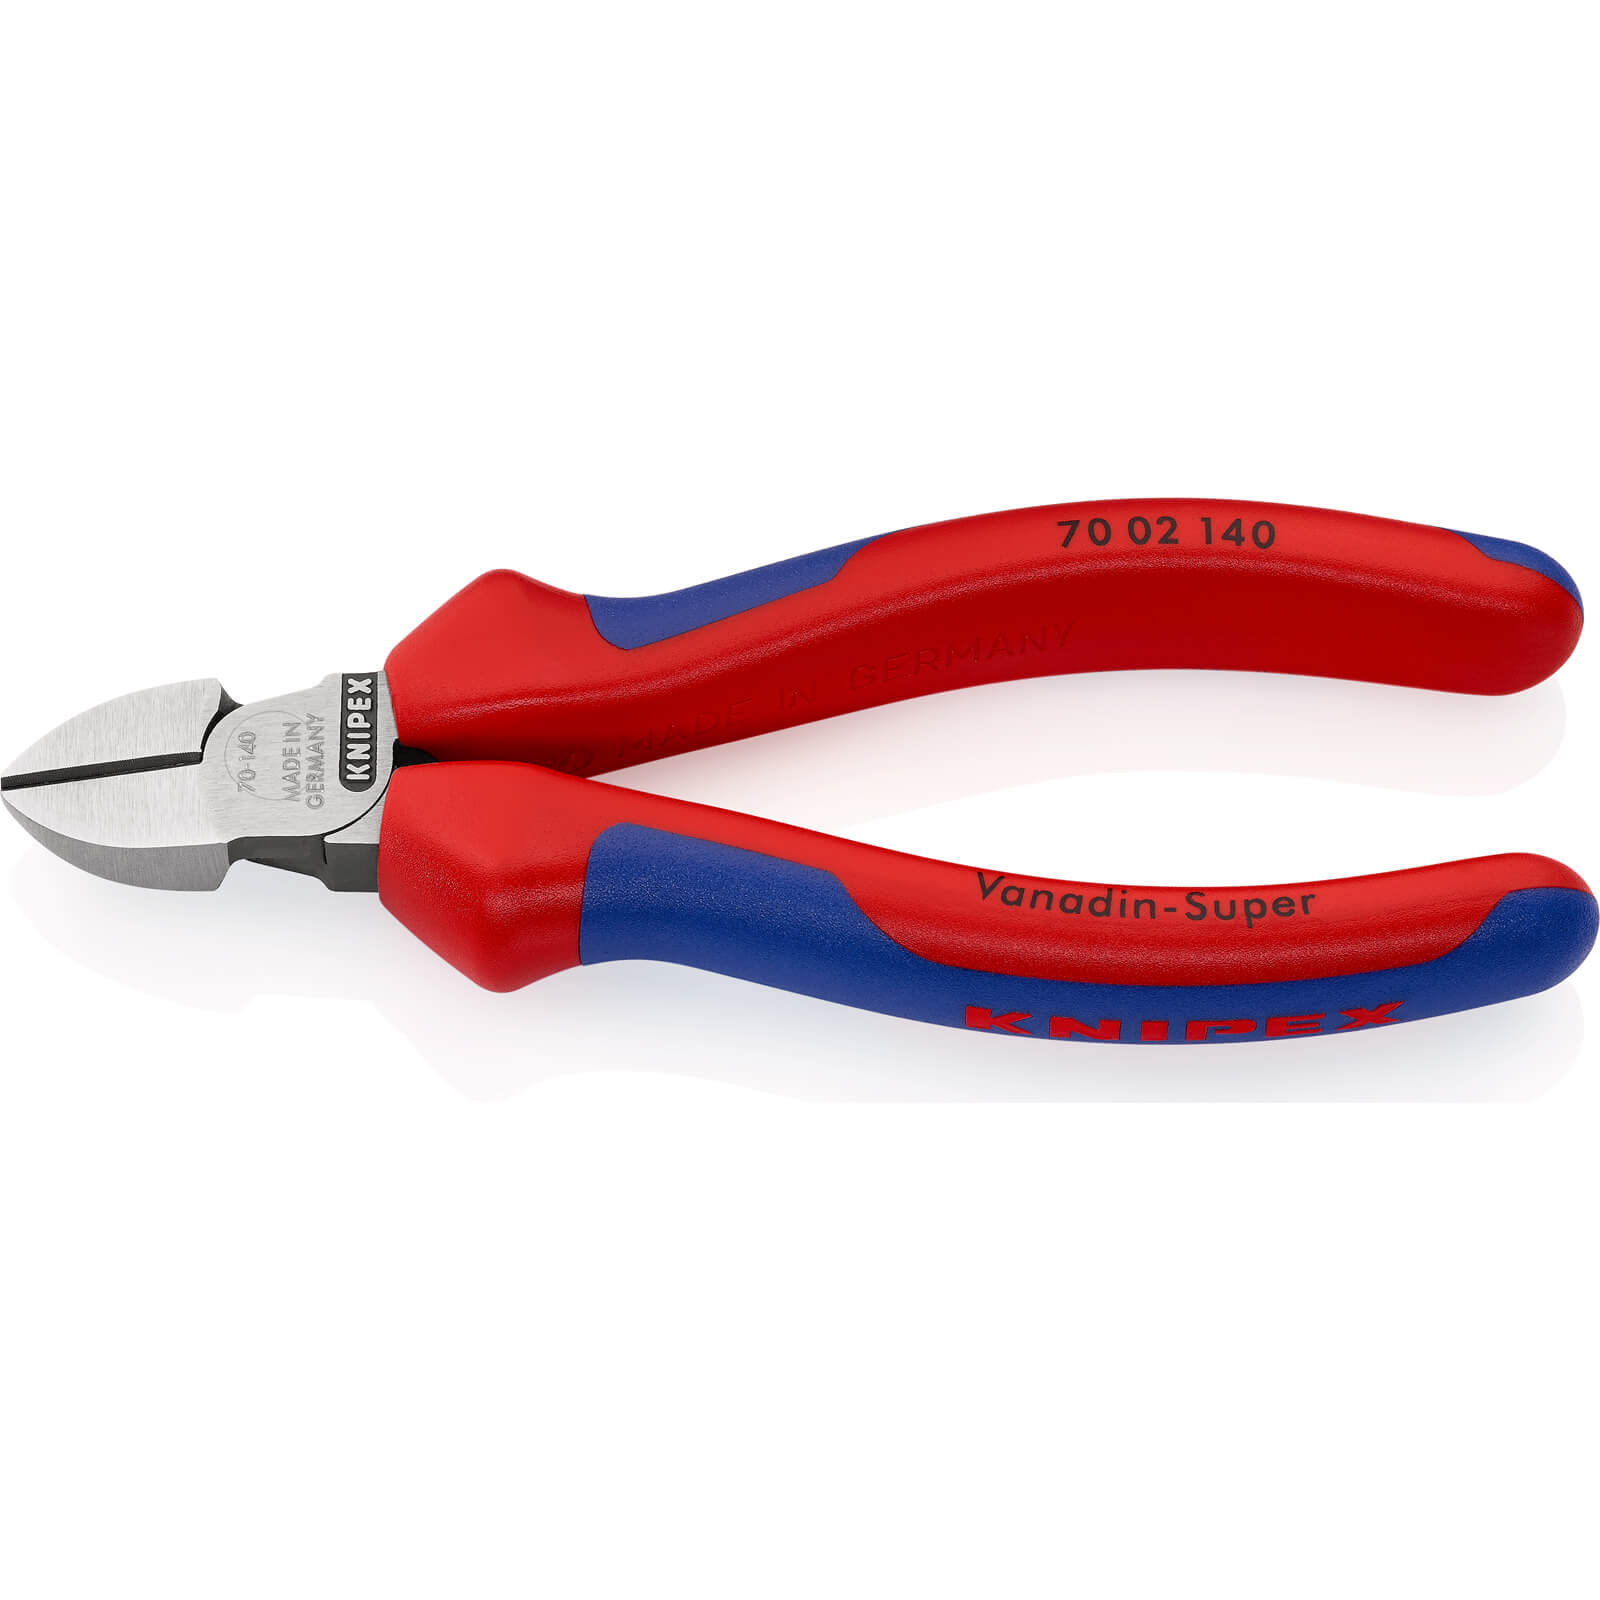 Image of Knipex 70 02 Diagonal Side Cutting Pliers 140mm